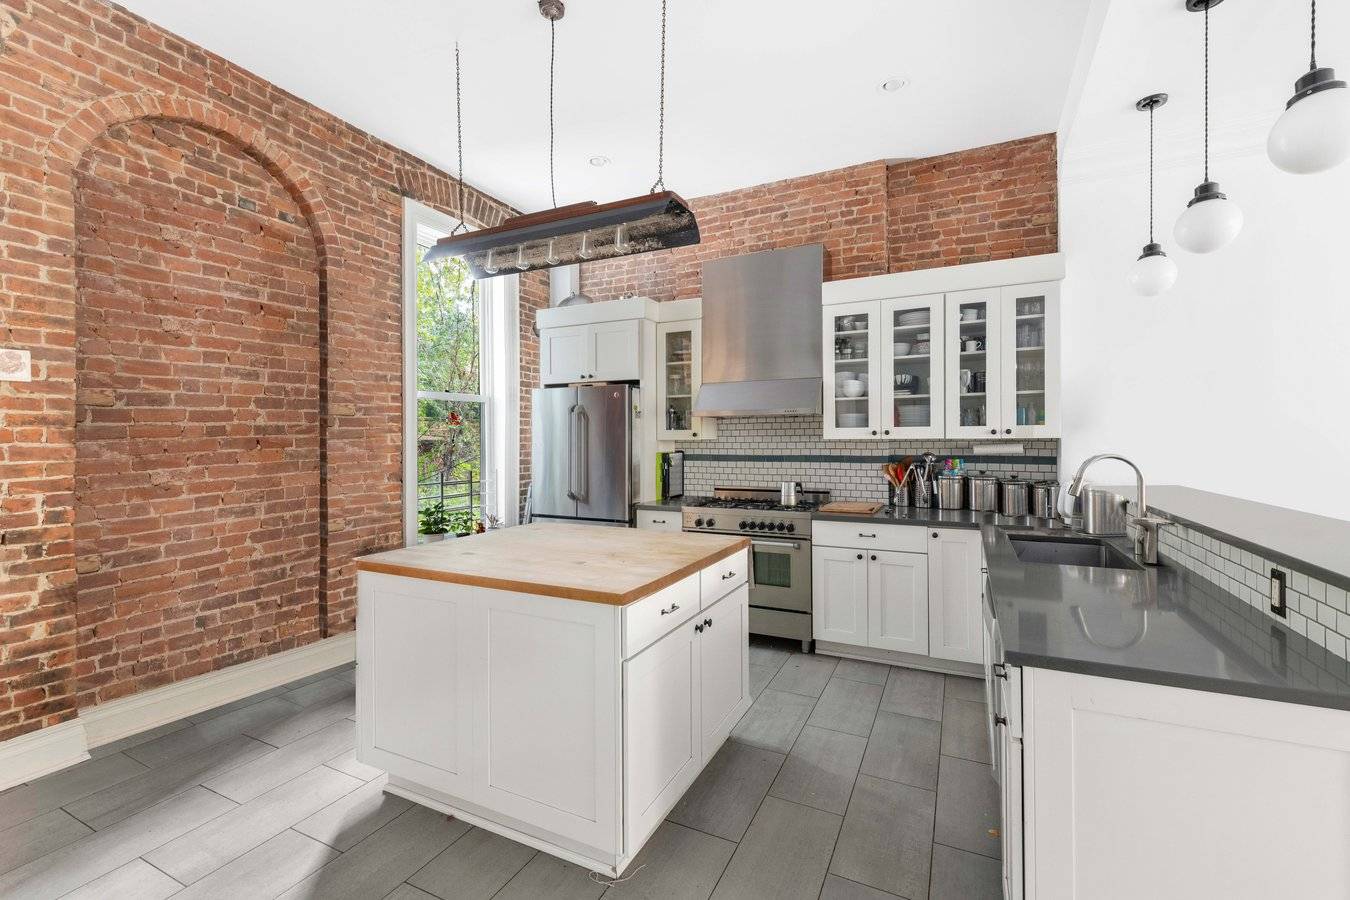 Experience spacious brownstone living at its best in historic Clinton Hill.